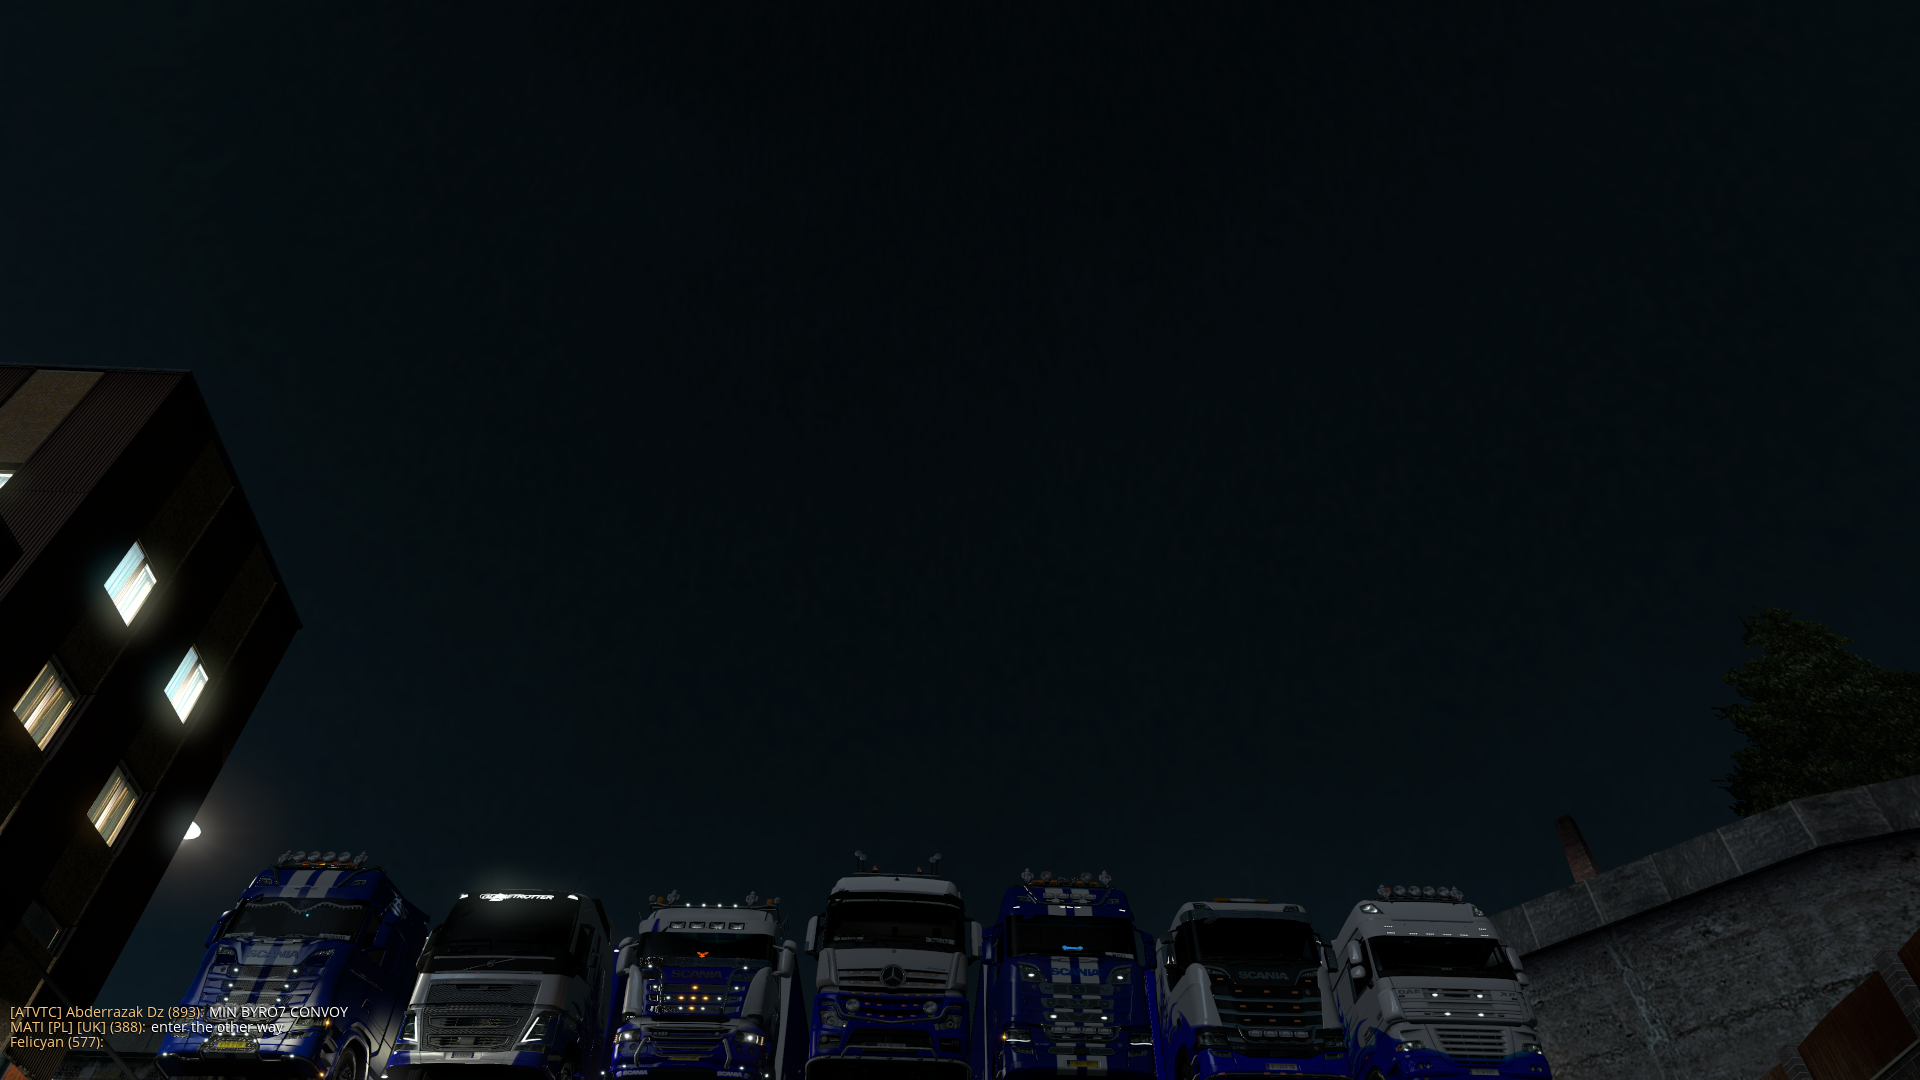 ets2_20200221_214851_00.png